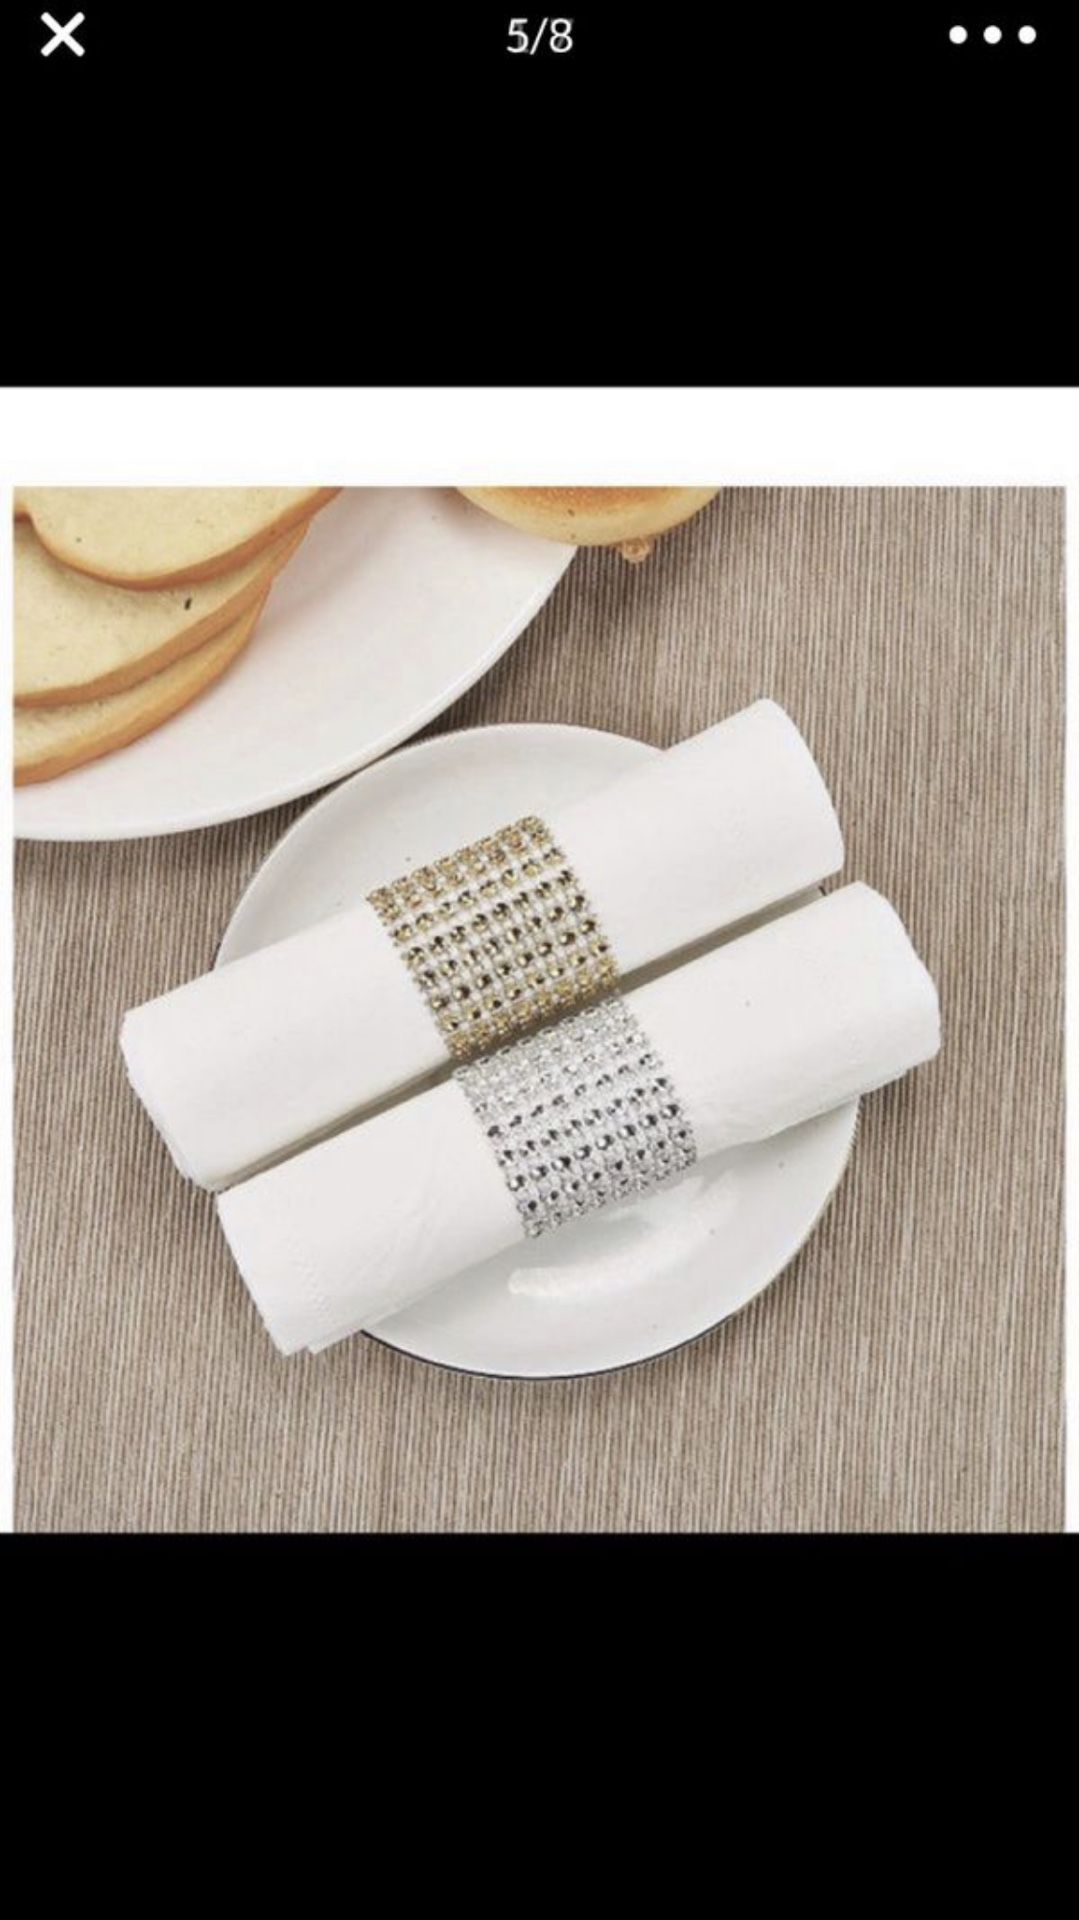 napkin rings for party wedding。 gold /sliver 50pcs/$5